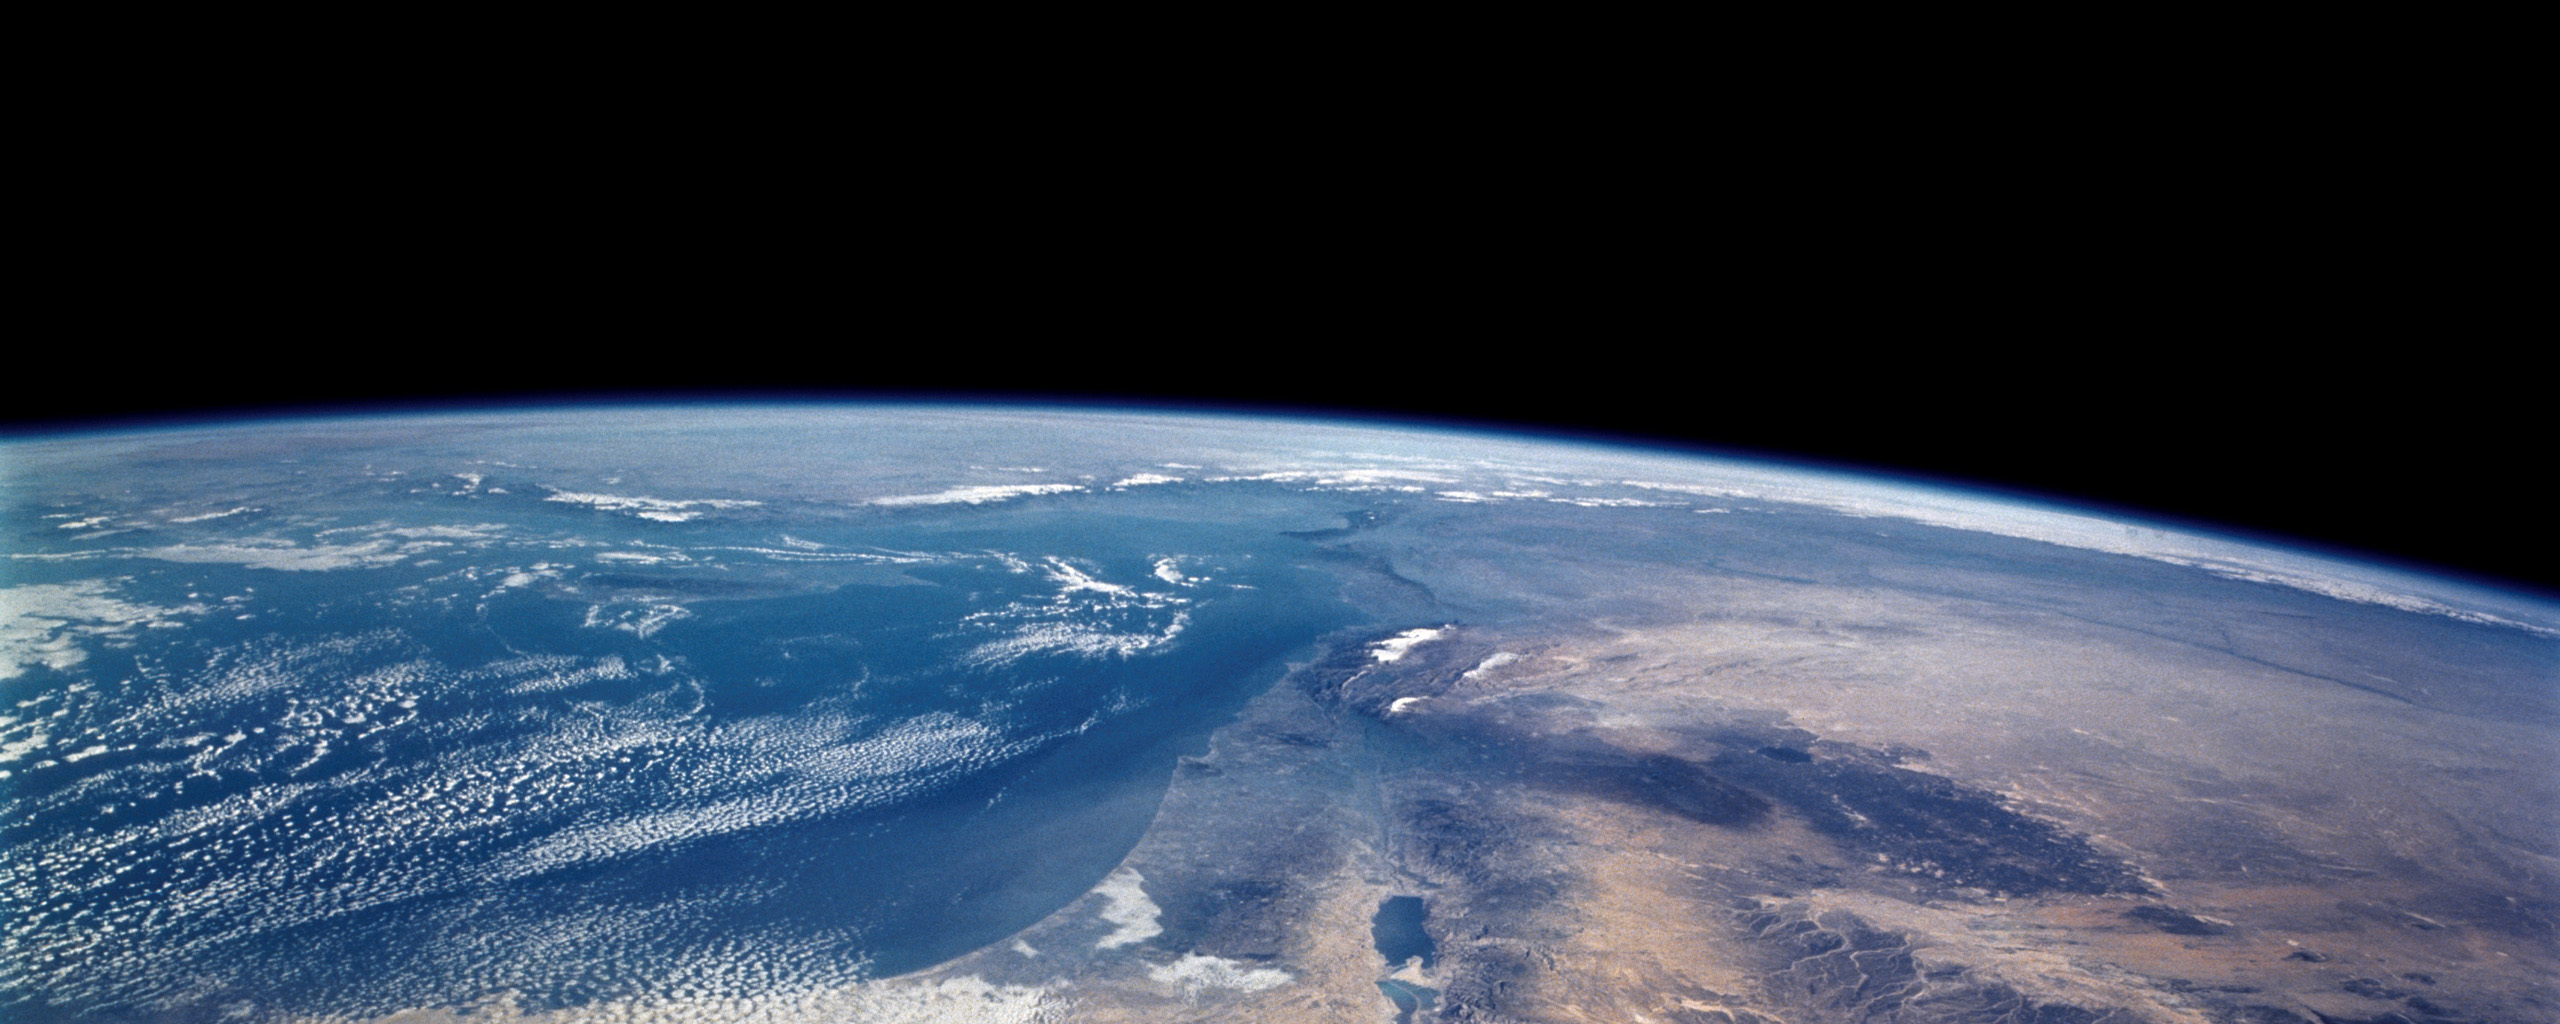 Earth From Space Dual Monitor Wallpaper Myconfinedspace